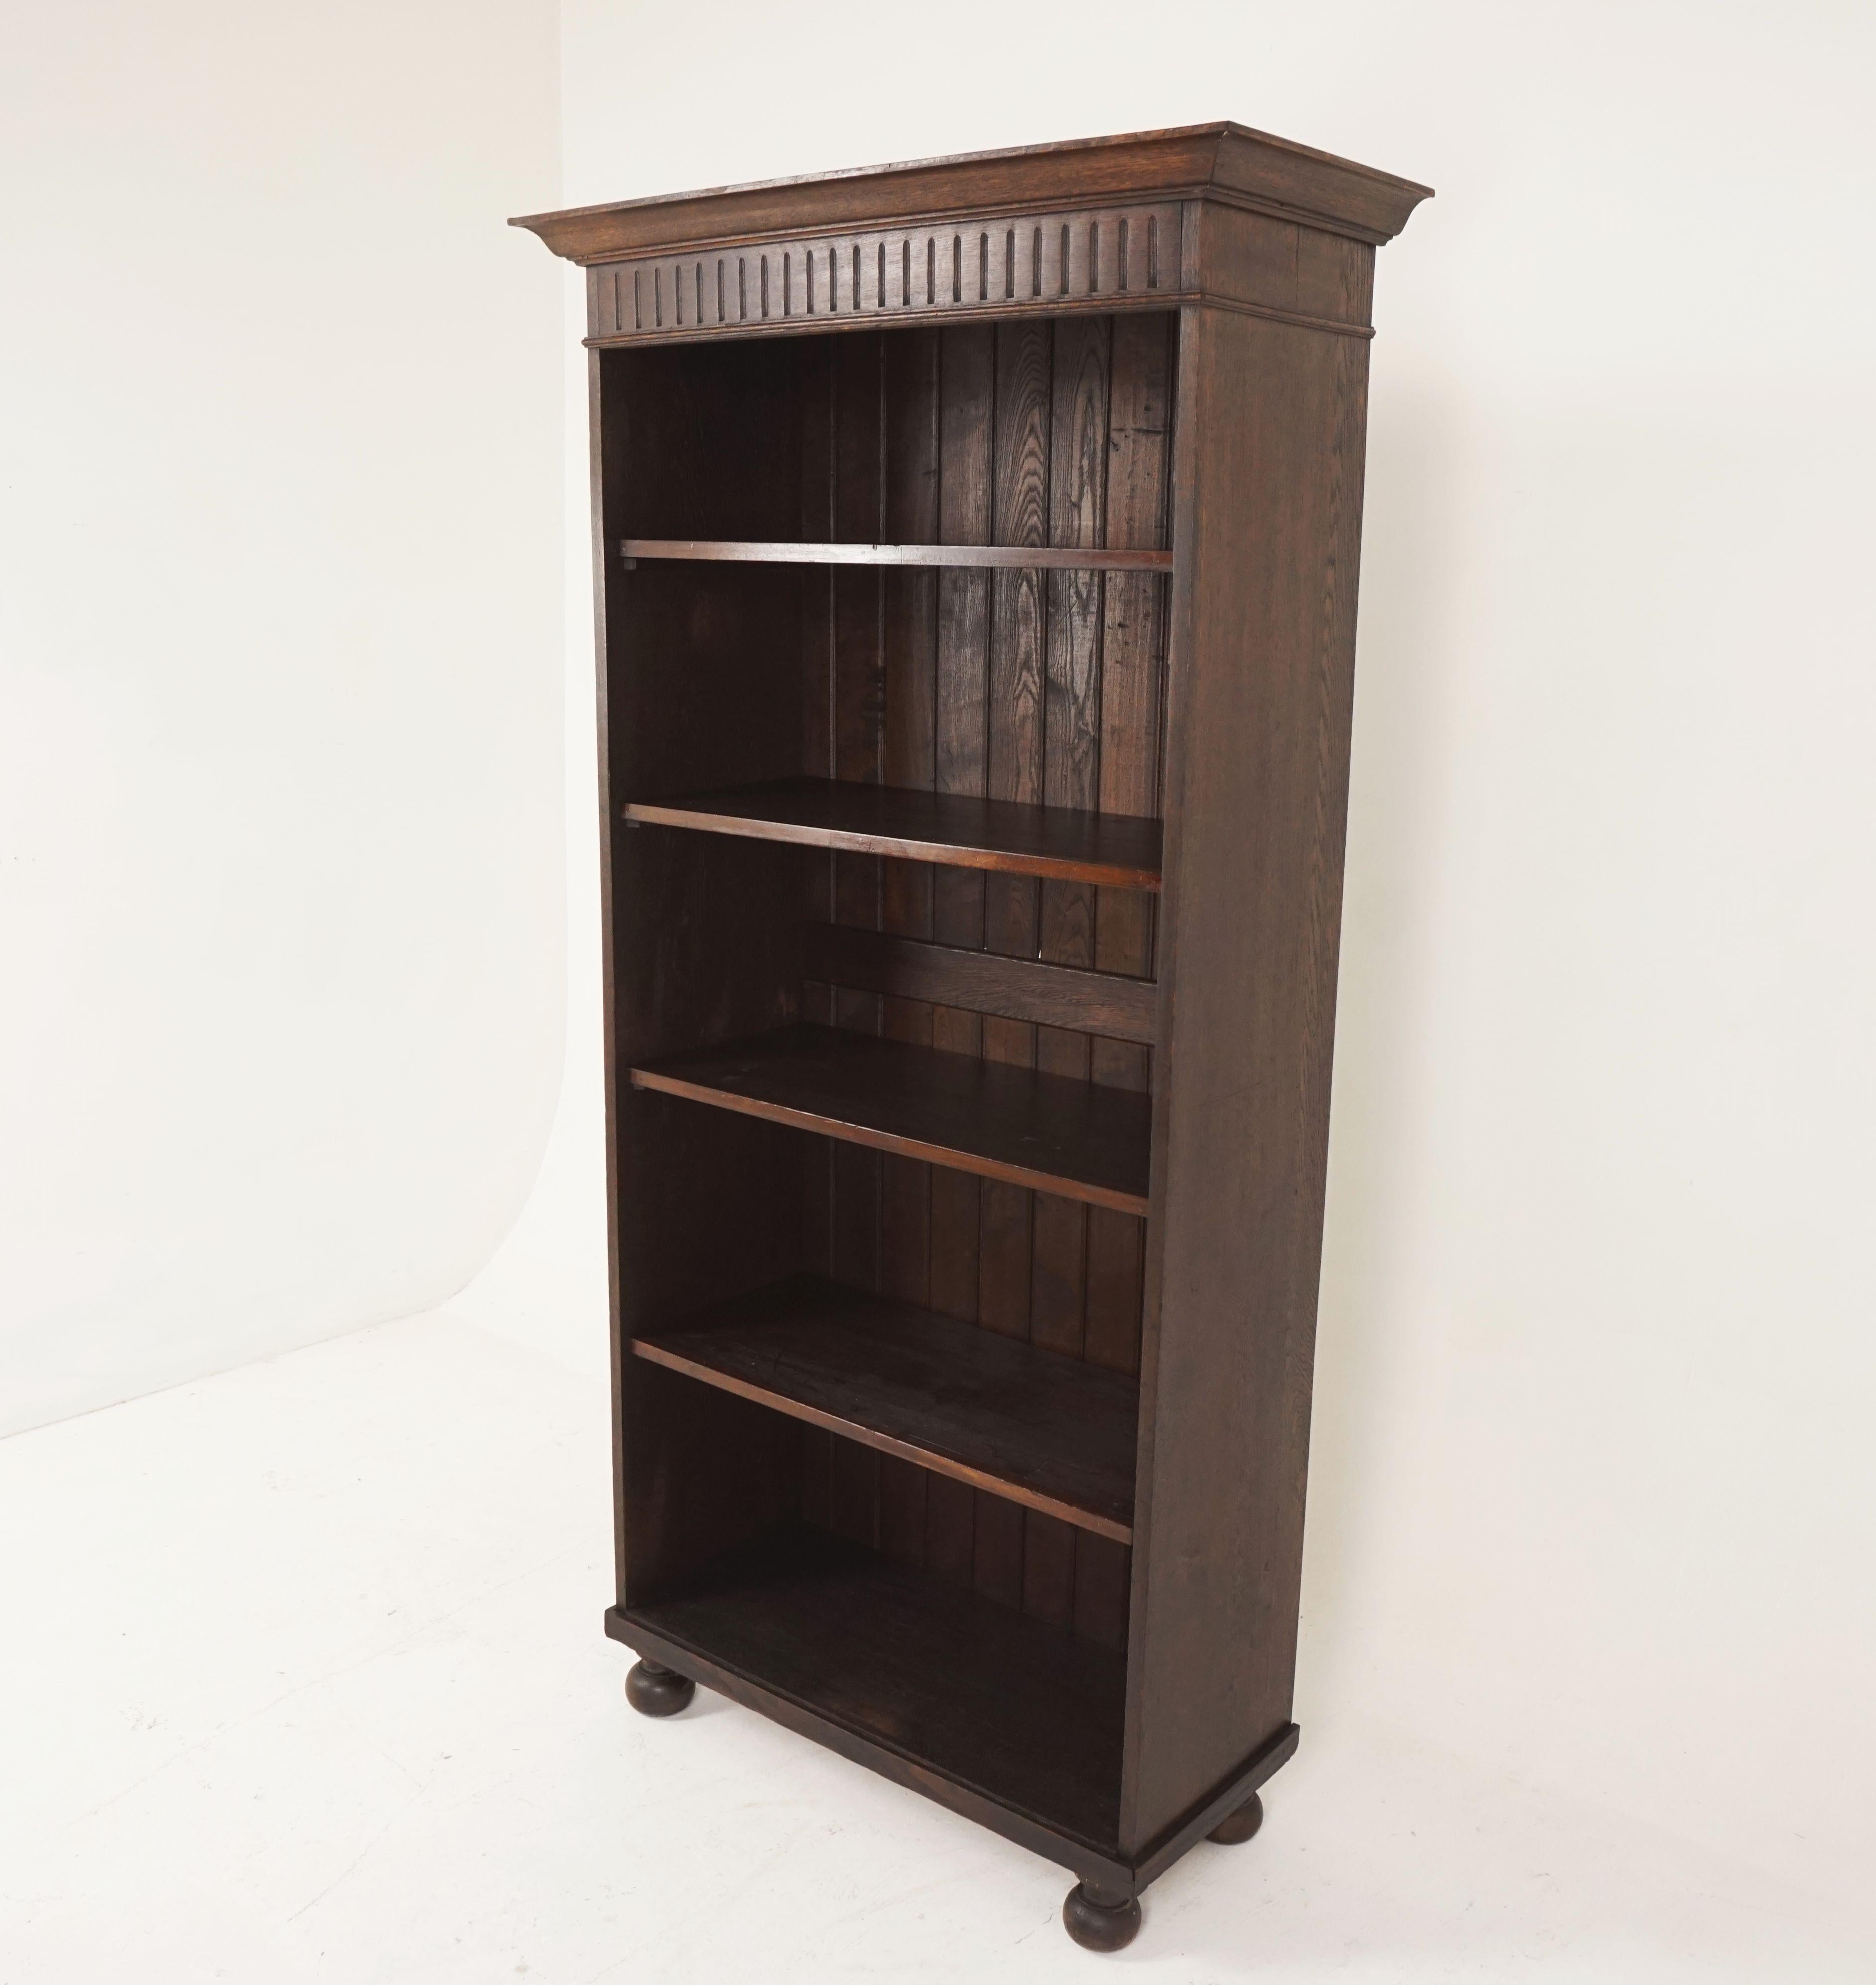 Antique tall oak open bookcase, display cabinet, Scotland, 1910

Scotland, 1920
Solid oak
Original finish
Shaped cornice with frieze below
Attractive paneled back boards
Four wooden shelves
All raised on four bun feet
Very functional